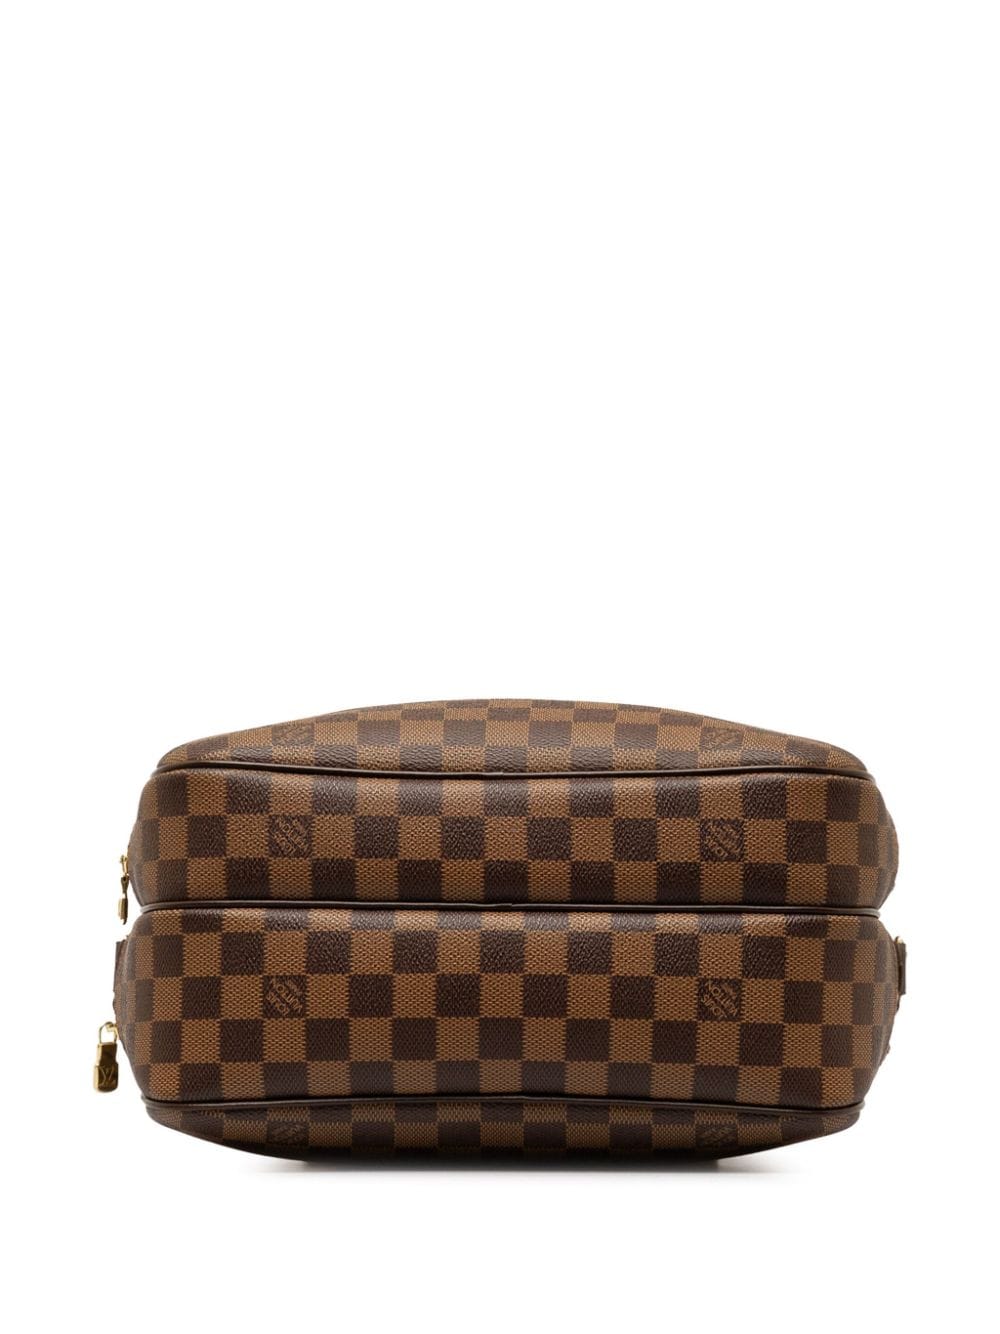 Pre-owned Louis Vuitton Reporter Pm 斜挎包（2007年典藏款） In Brown